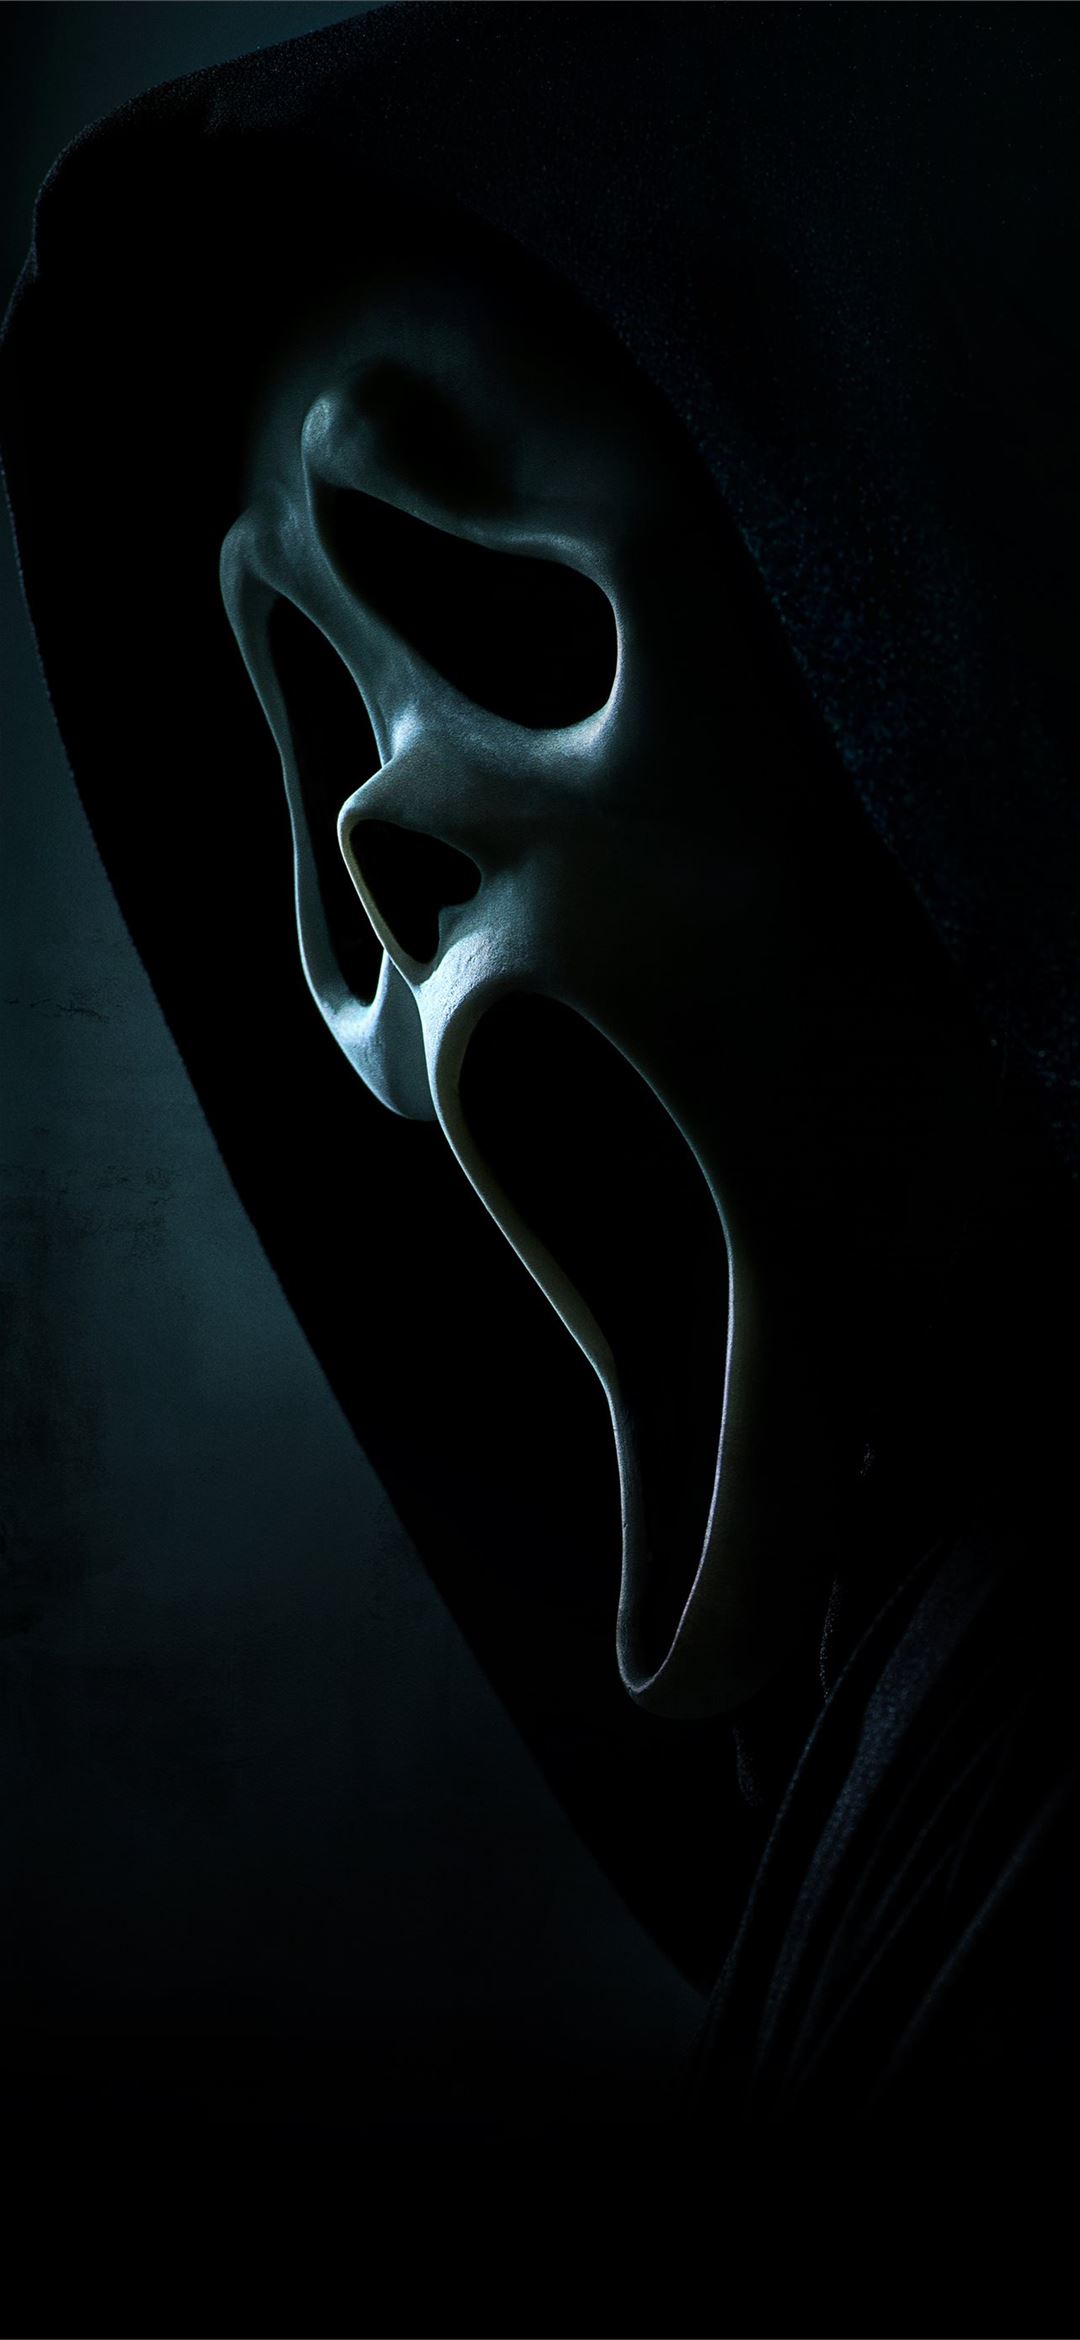 Scream iphone wallpapers free download